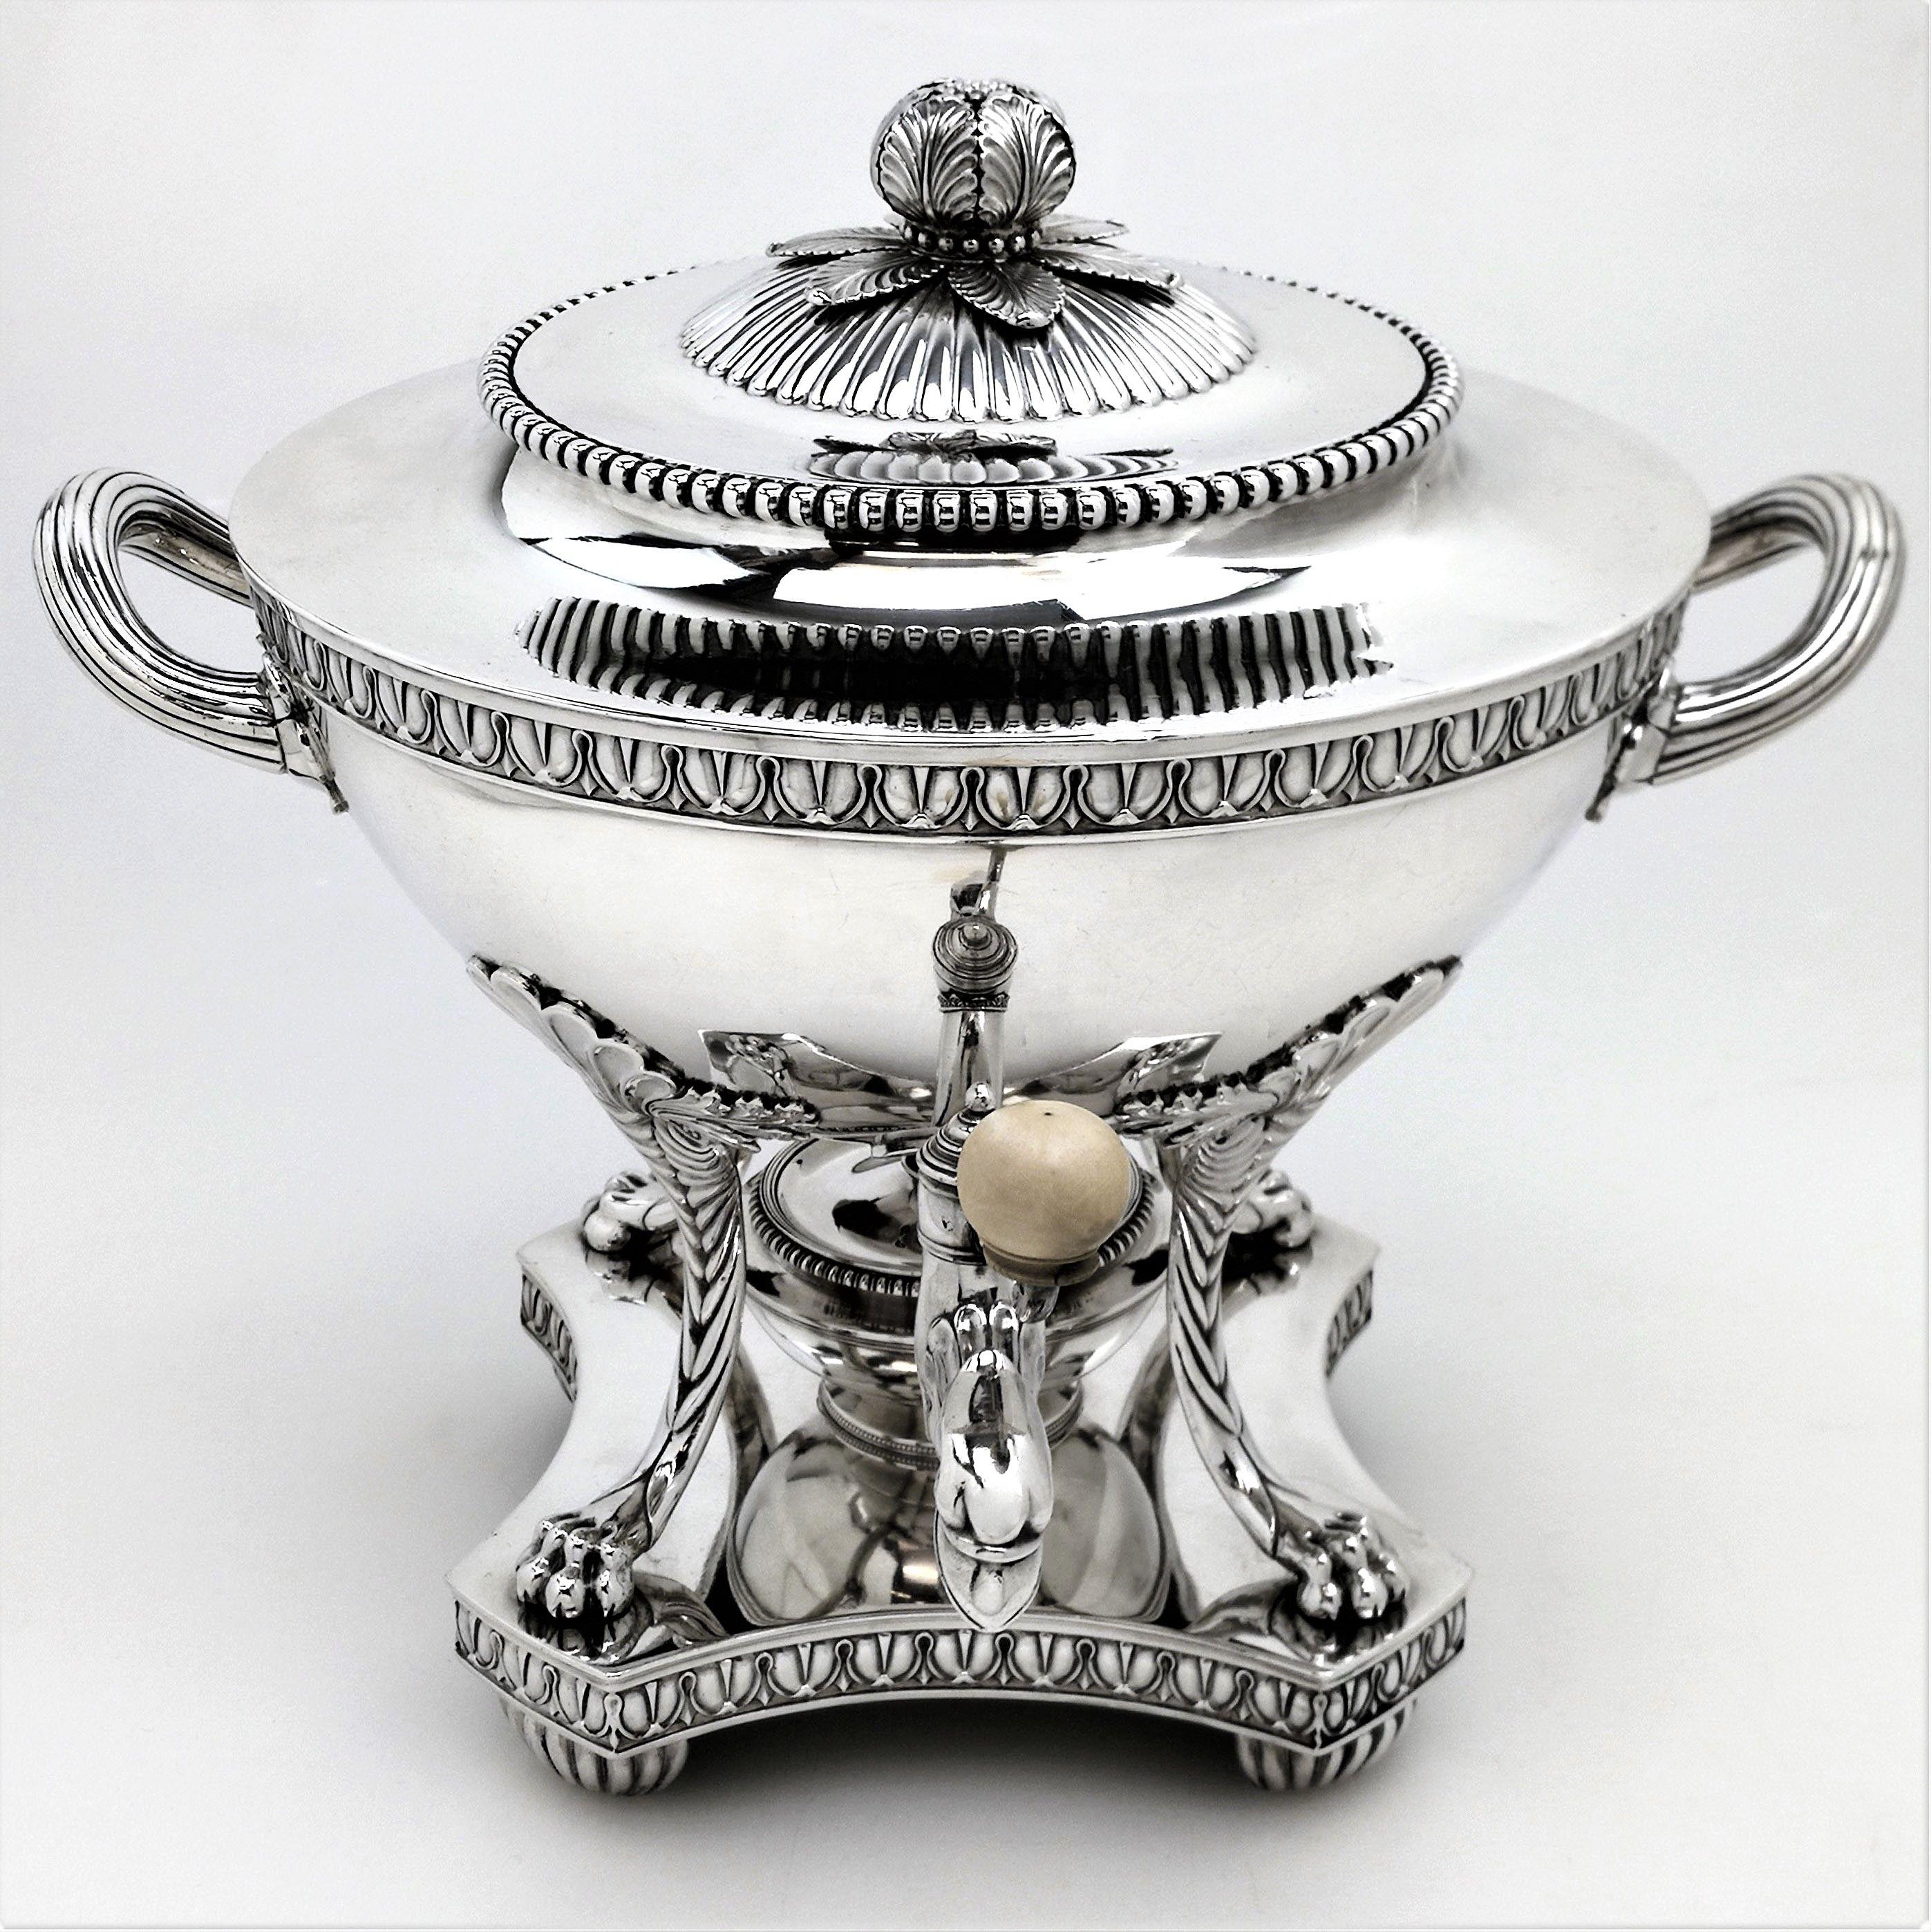 A magnificent antique George III sterling silver tea urn with a hemispherical body supported by four impressive claw feet with shell capitals. The tea urn stands on a shaped base supported by four semi circular chased fluted feet. The rim of the